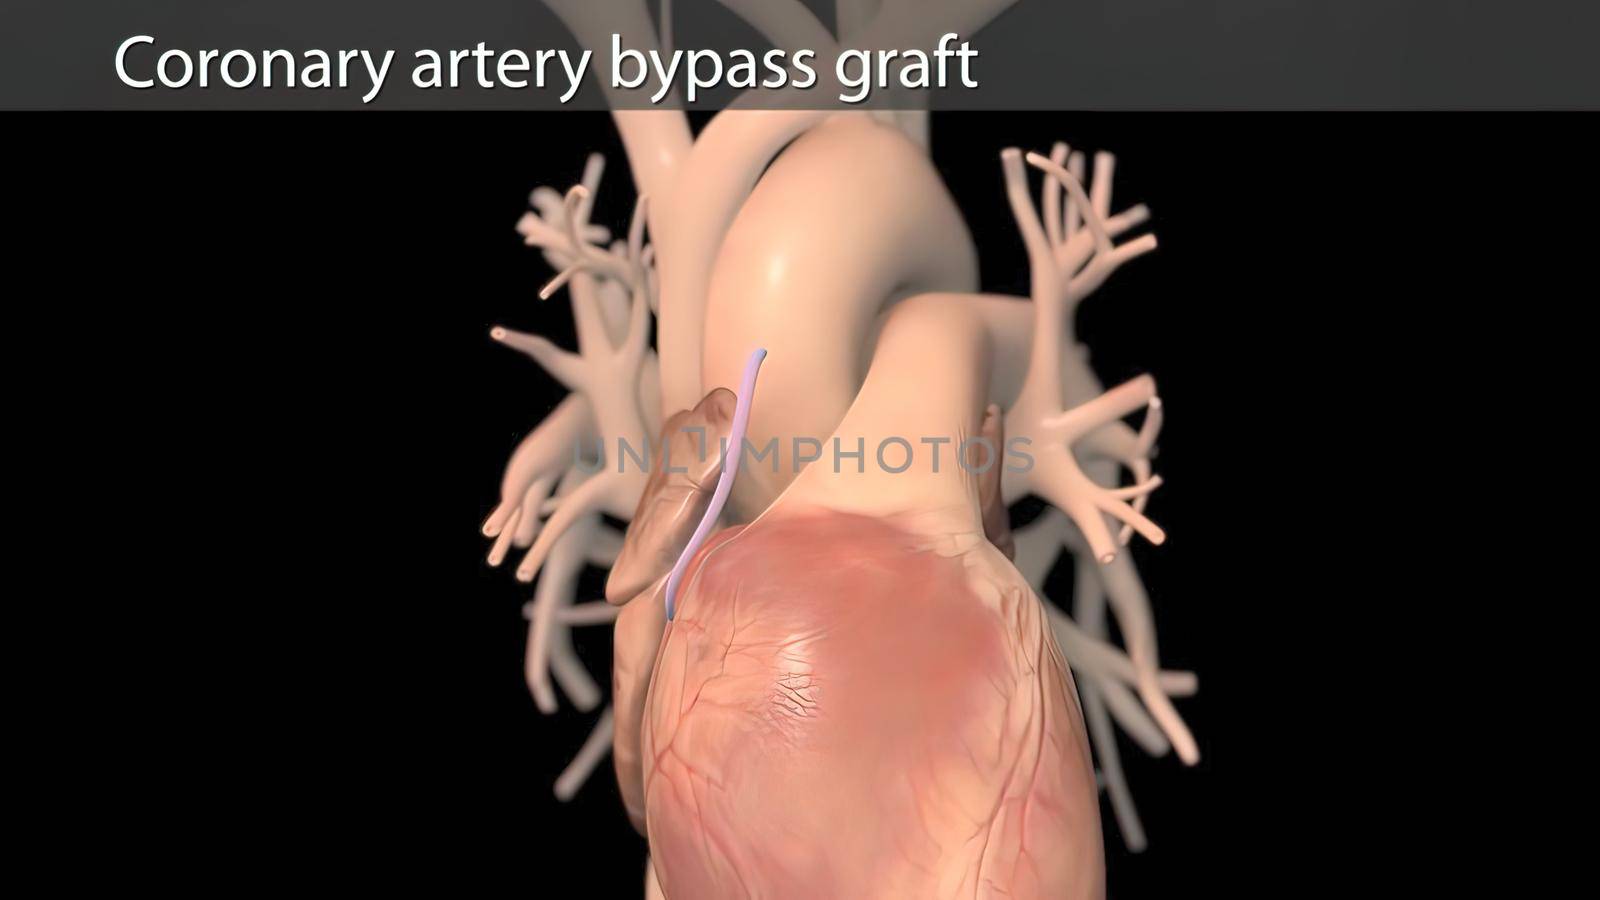 Coronary artery bypass surgery is done using a healthy blood vessel called a graft. 3D illustration